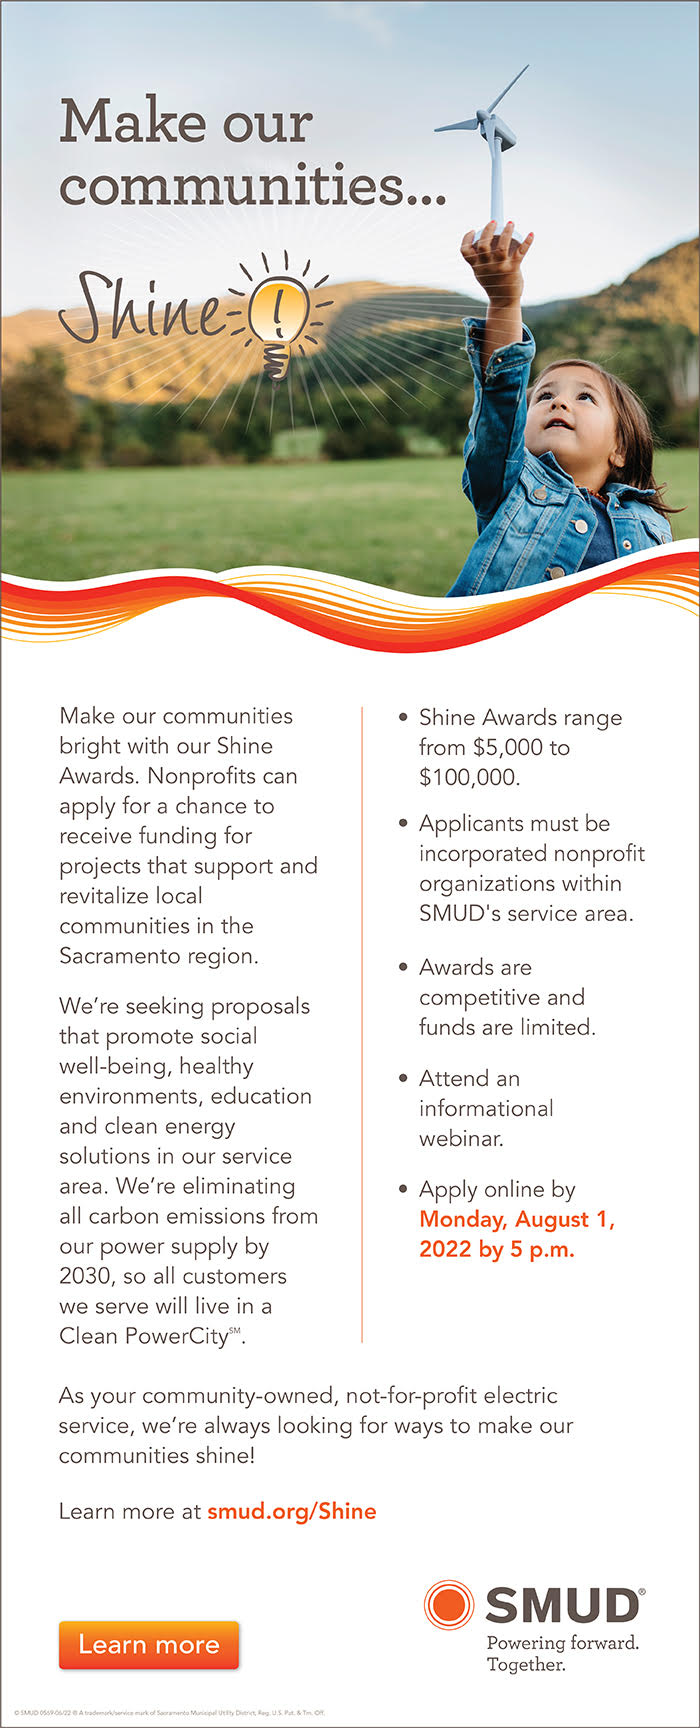 SMUD is now accepting applications from nonprofits for Shine Awards